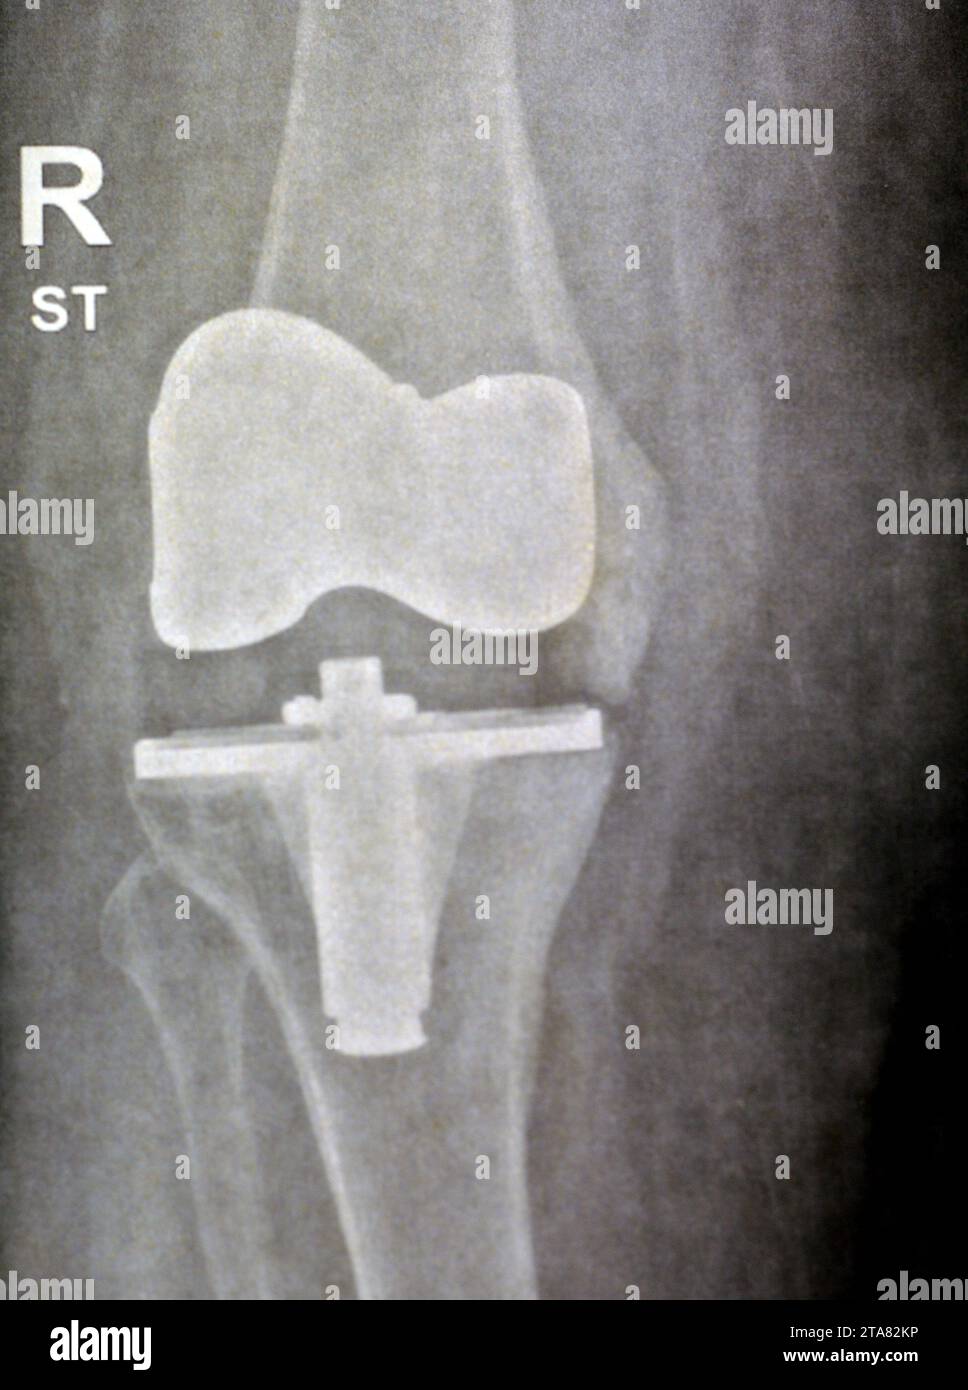 Plain X-ray showing Total right knee replacement arthroplasty after joint osteoarthritis grade 4, a surgical procedure to replace the weight-bearing s Stock Photo